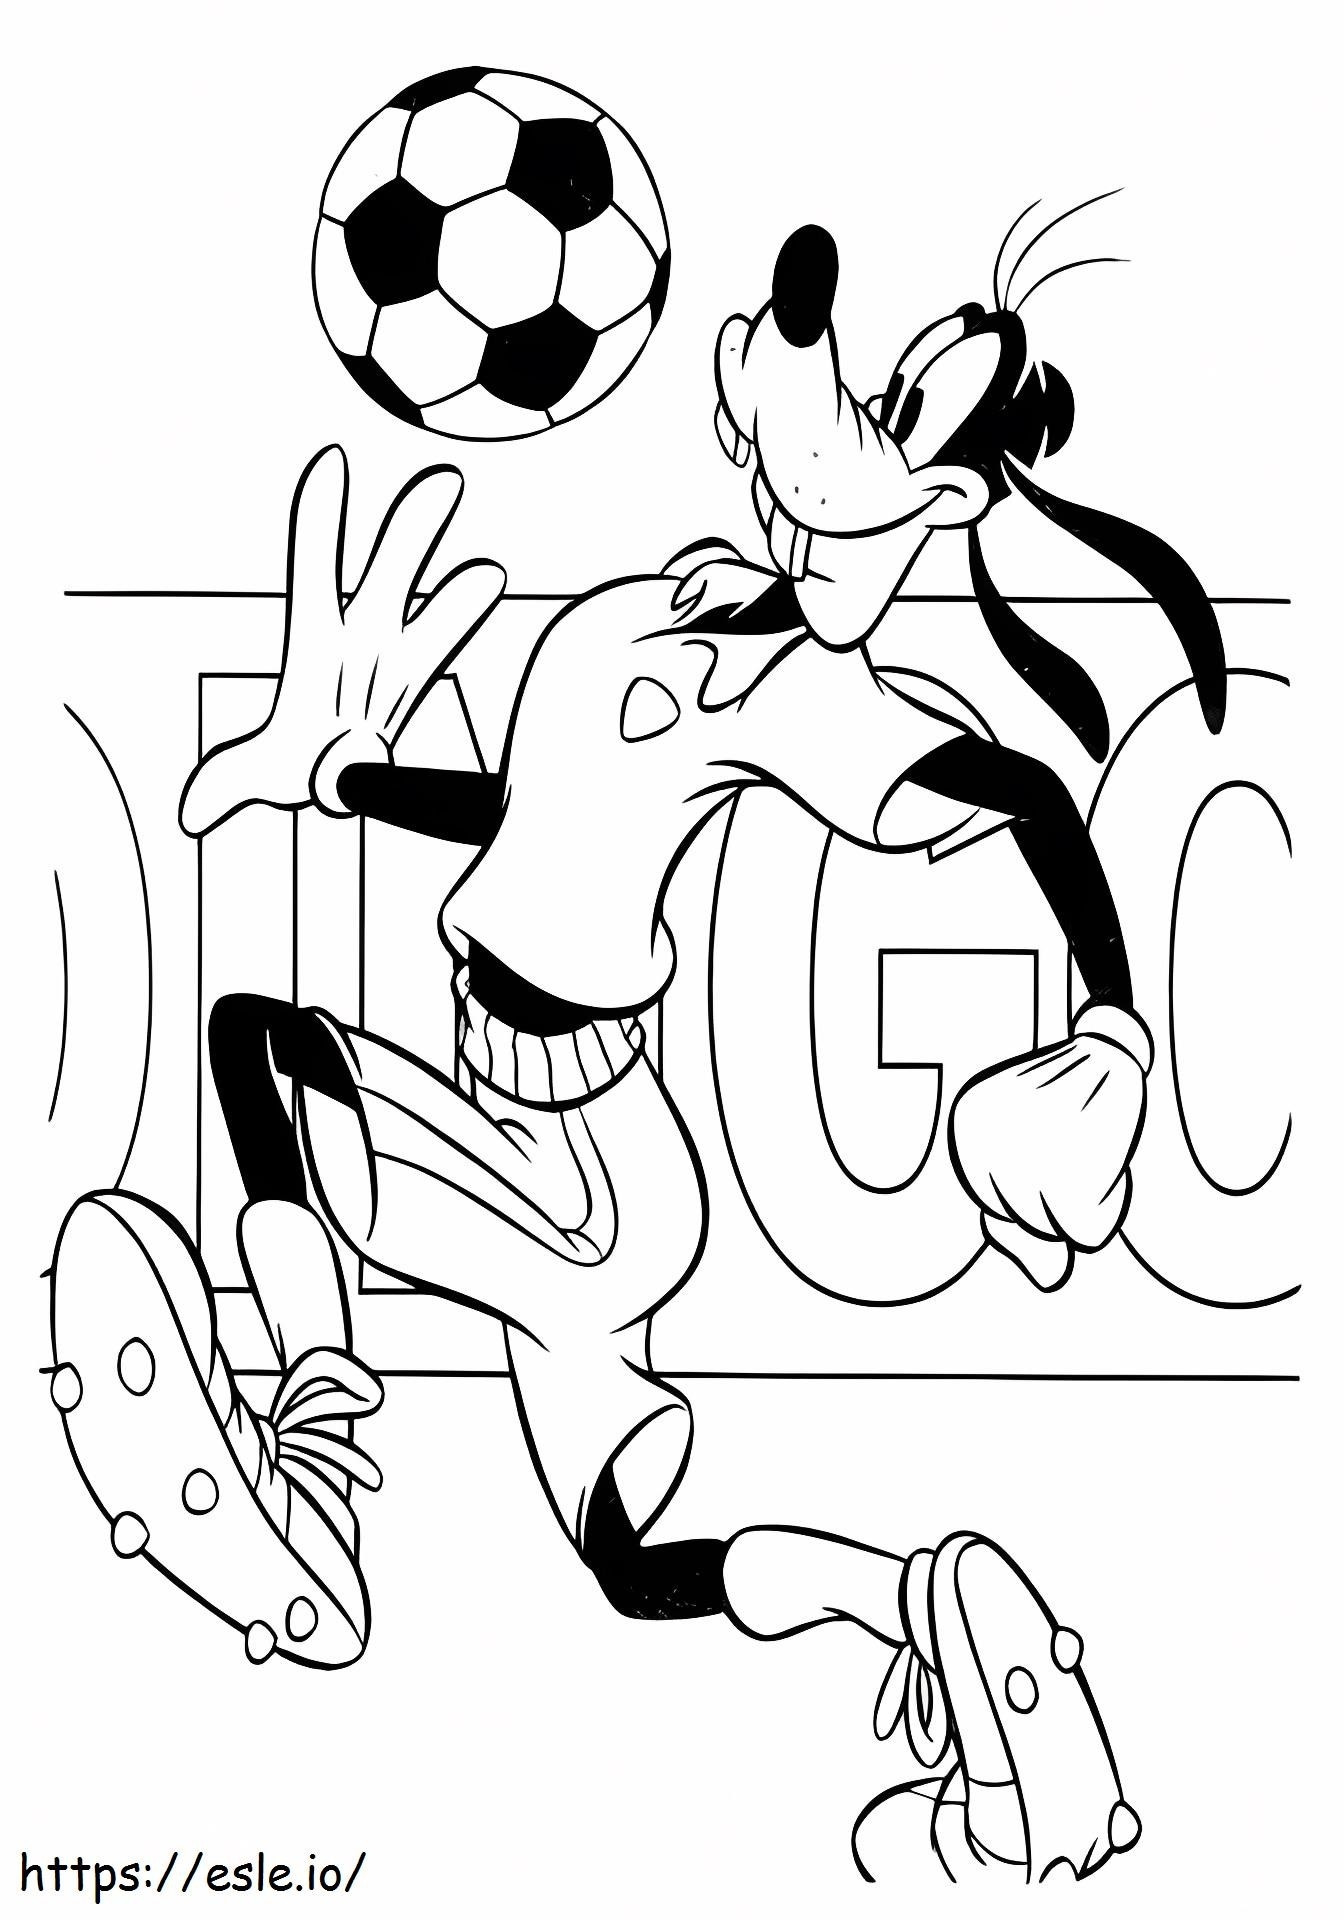 Goofy Playing Soccer coloring page